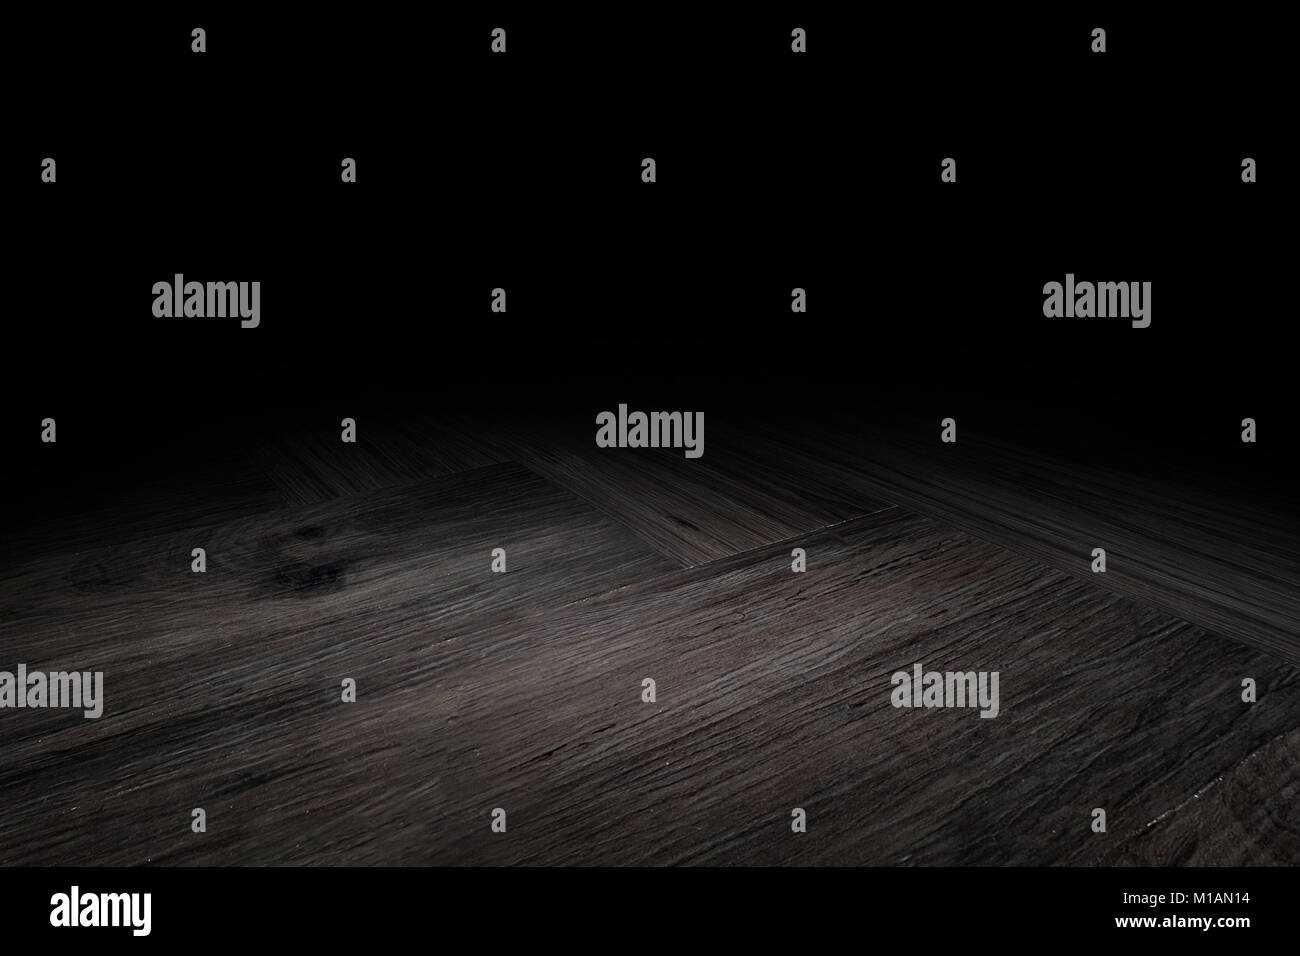 Dark Plank wood floor texture perspective background for display or montage of product,Mock up template for your design. Stock Photo